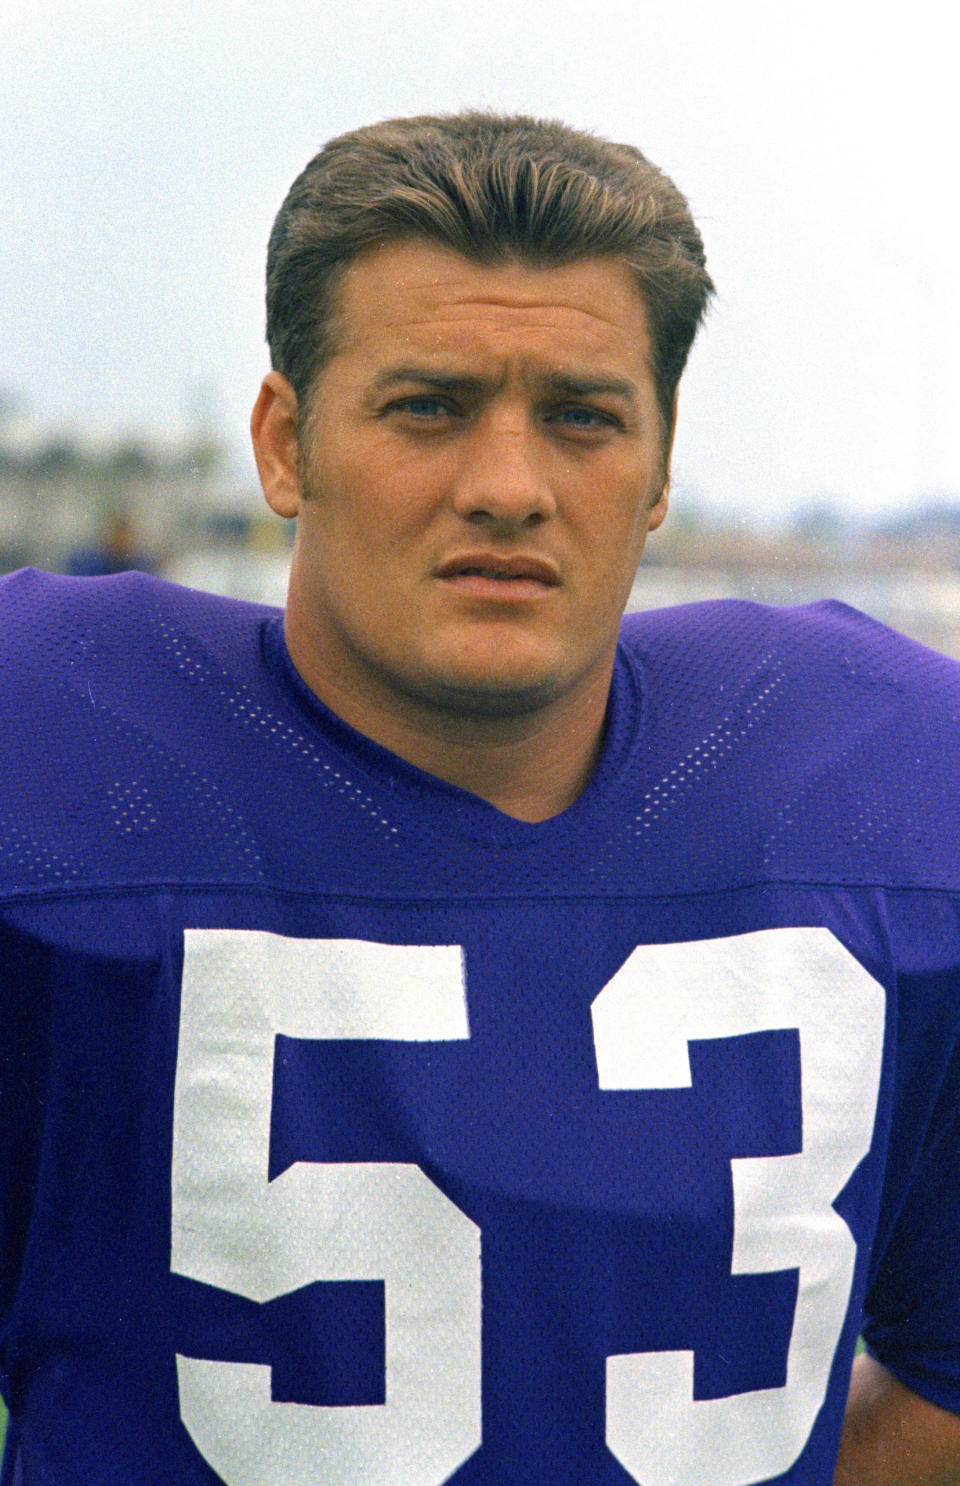 FILE - In this this 1970 file photo, Minnesota Vikings center Mick Tingelhoff (53) poses. Tingelhoff, the ultimate ironman who started 240 consecutive games at a bruising position for the Minnesota Vikings and played in four Super Bowls, died, the Vikings and the Pro Football Hall of Fame announced, Saturday, Sept. 11, 2021. He was 81. (AP Photo/File)